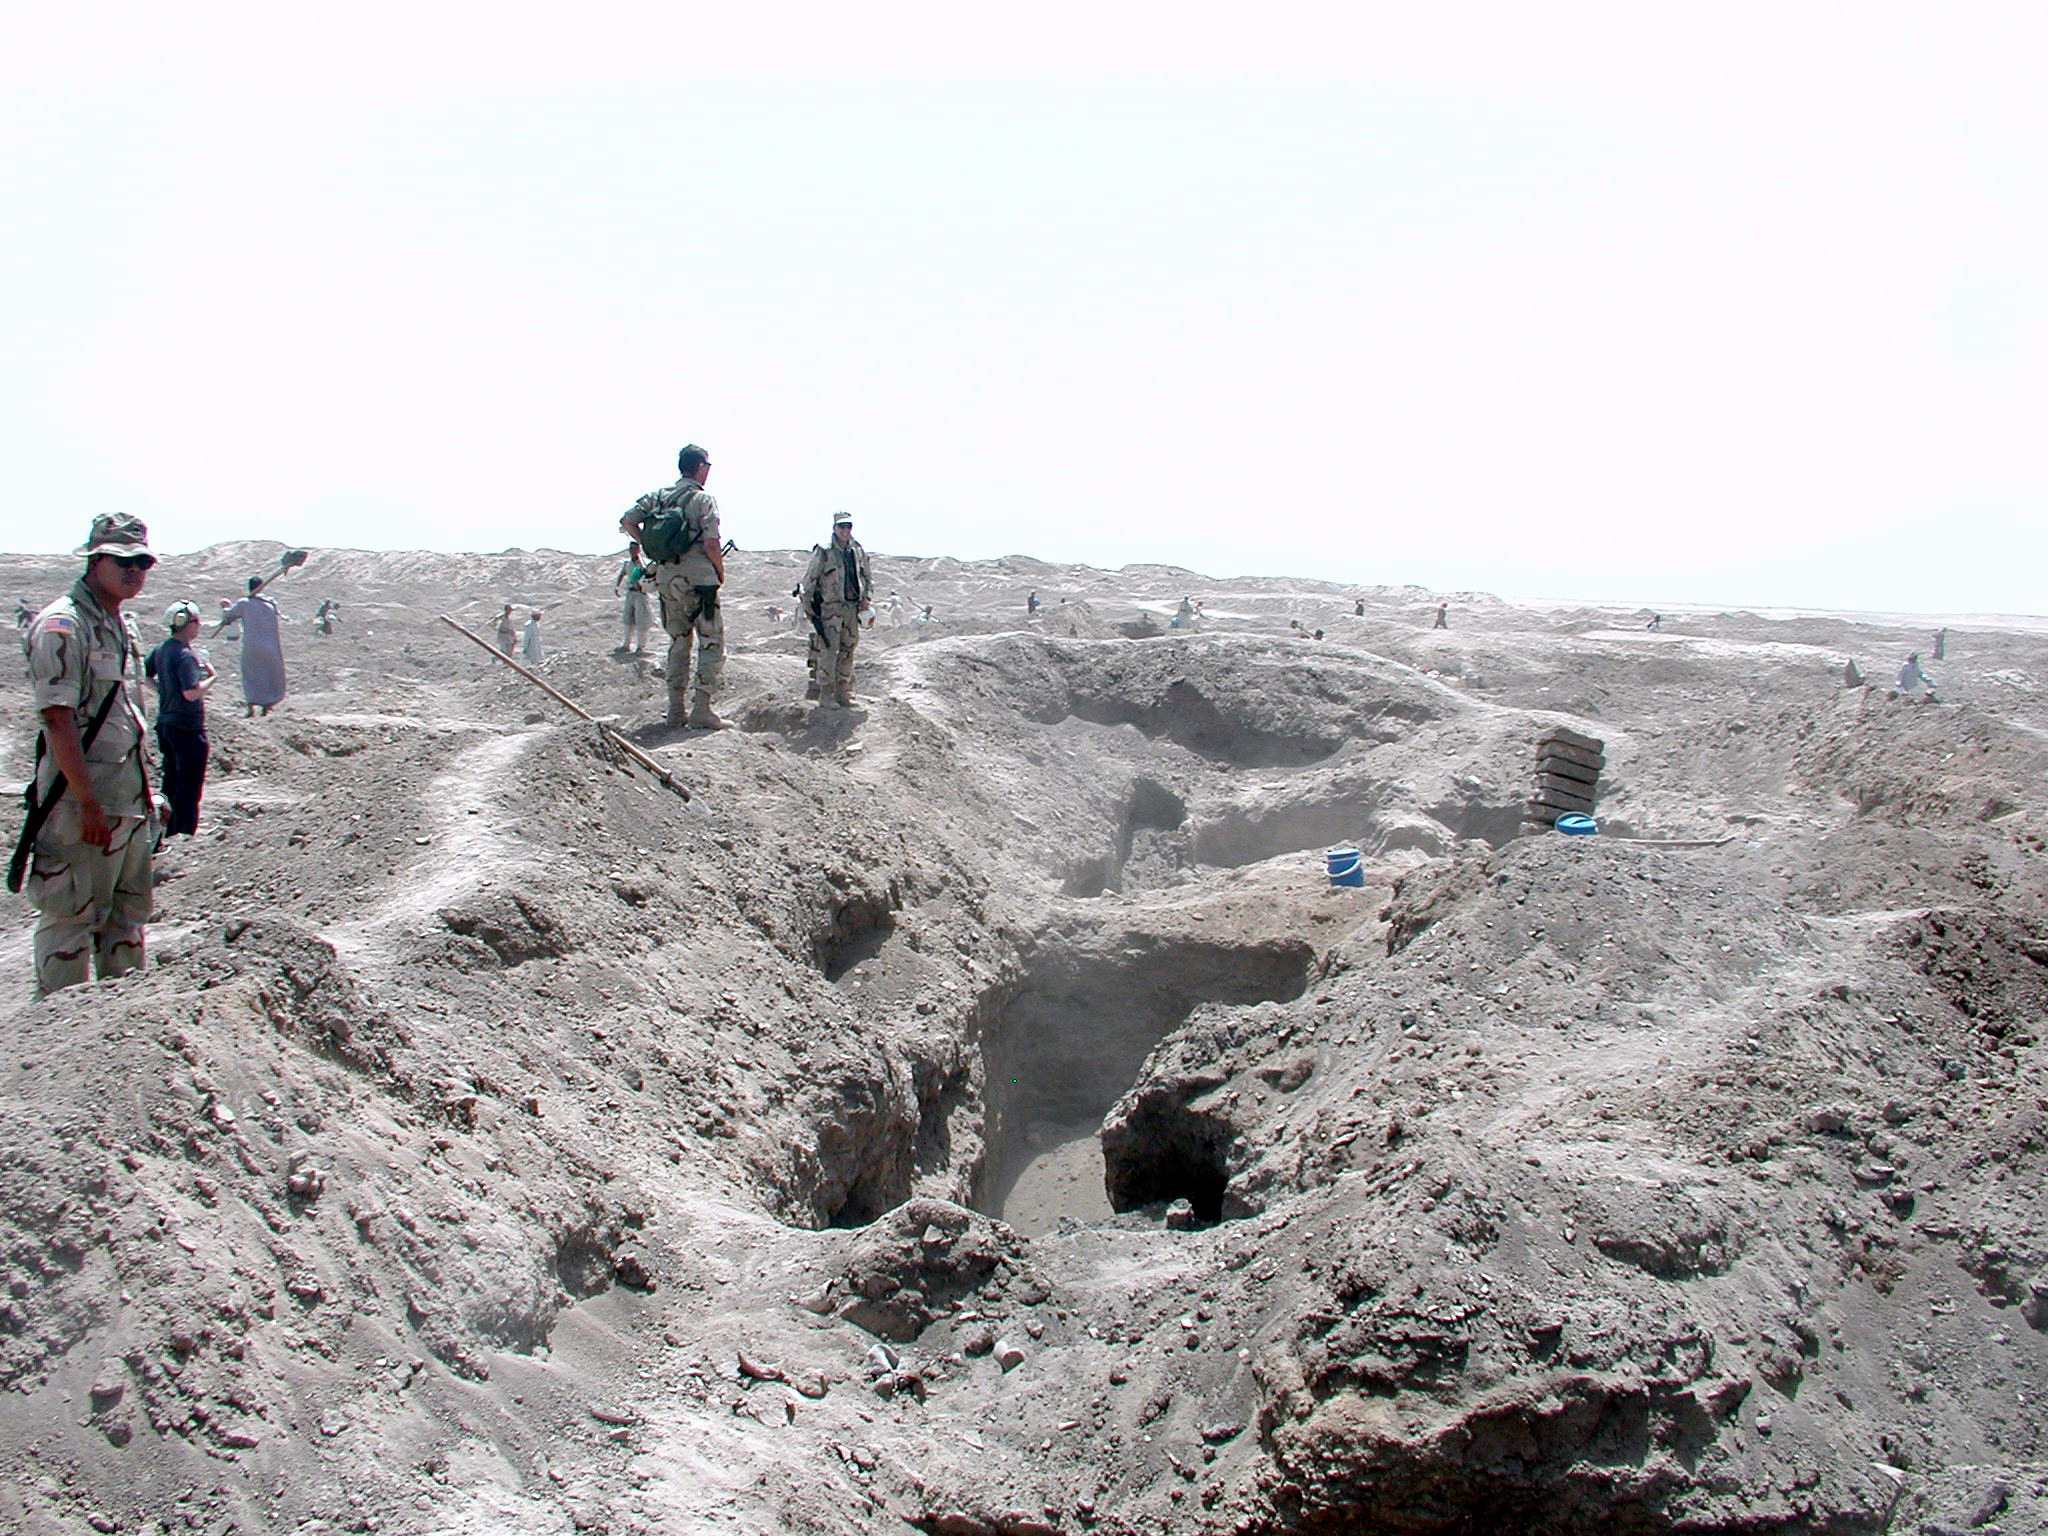 archeology in Isin, badly looted Isin pictured while US troops were stationed in Iraq, a small amount of excavations vrs. lootings have been done